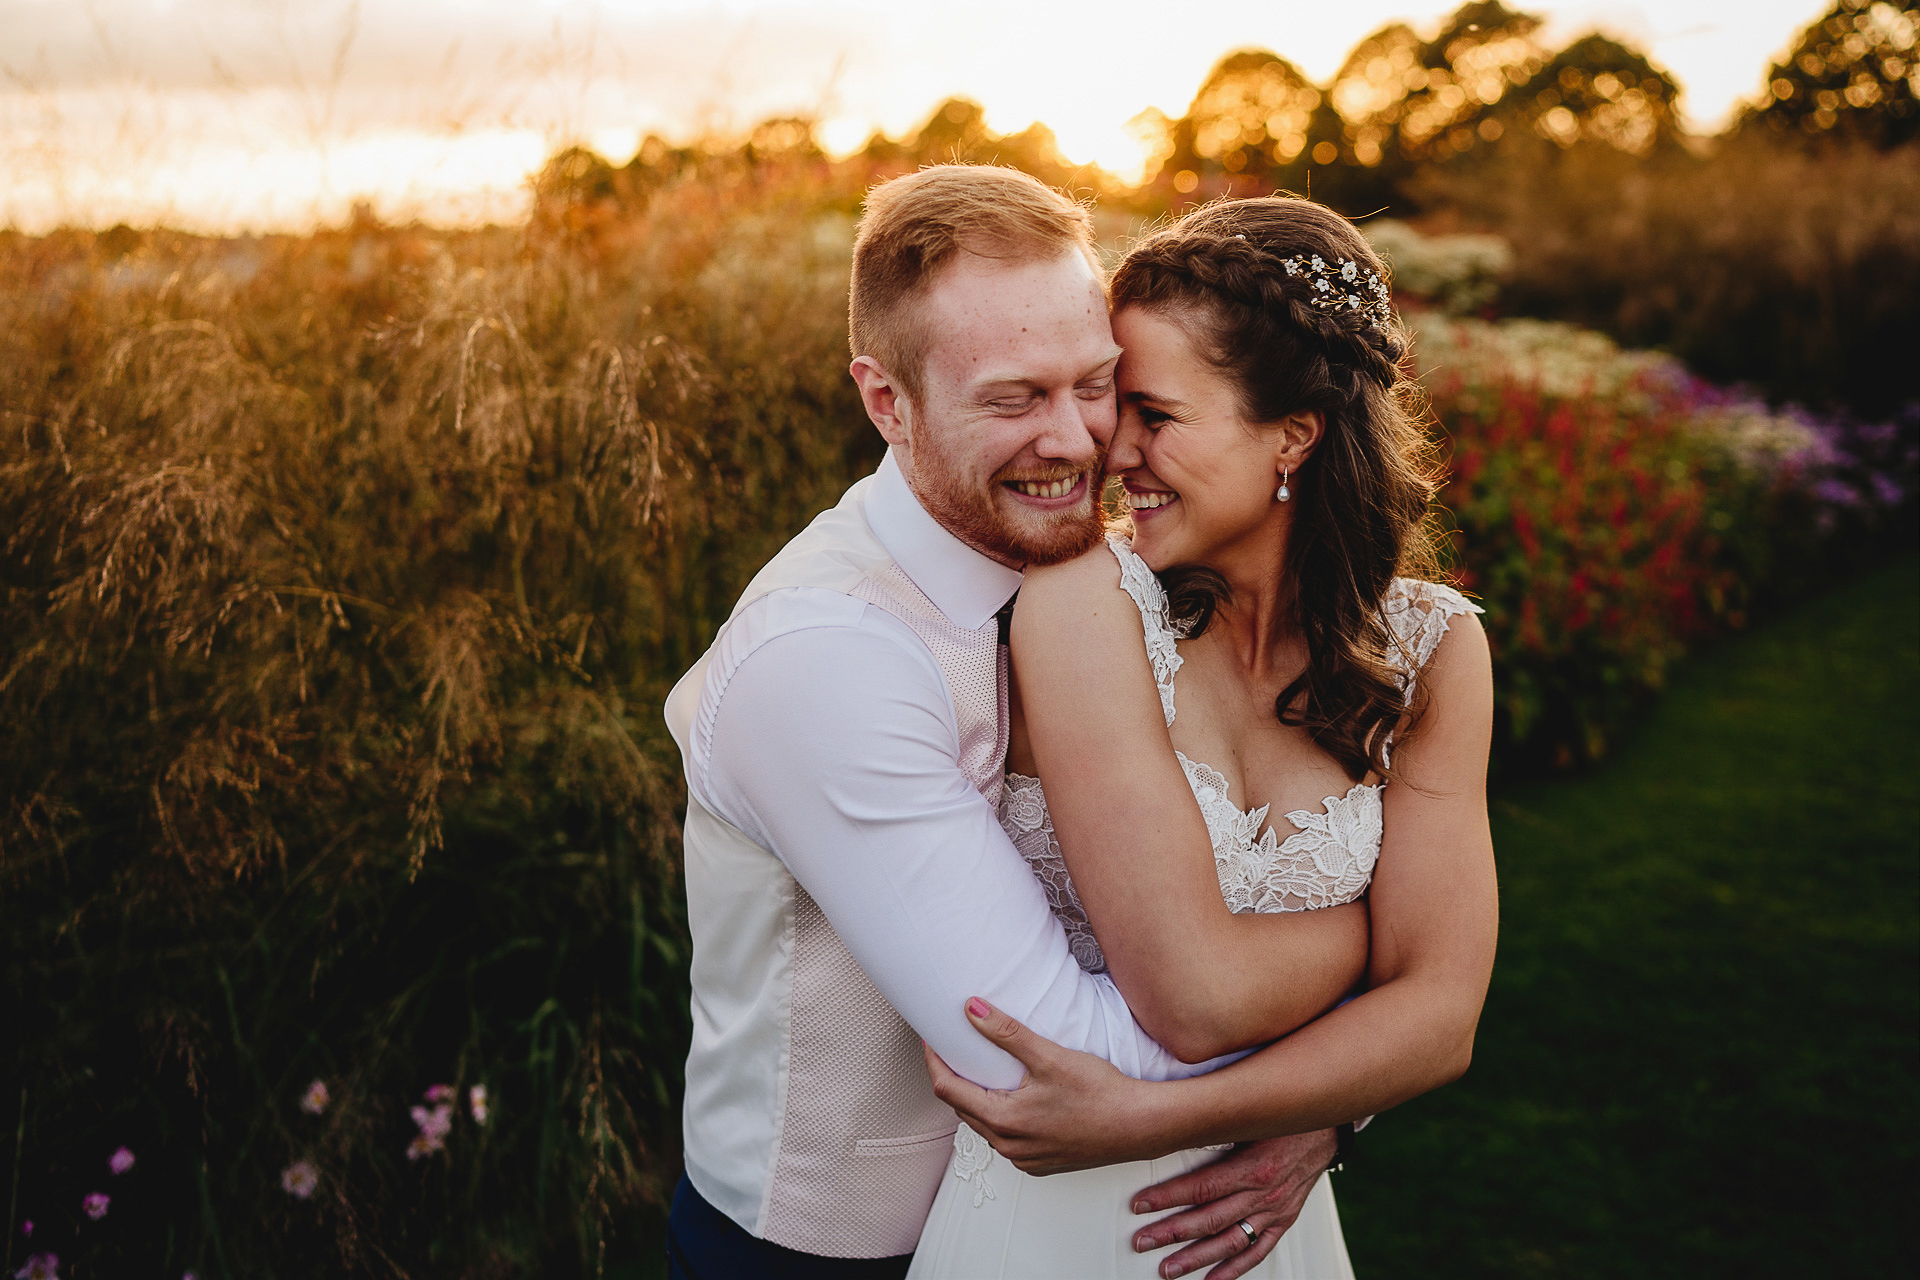 Overjoyed bride and groom cuddling in a sunset